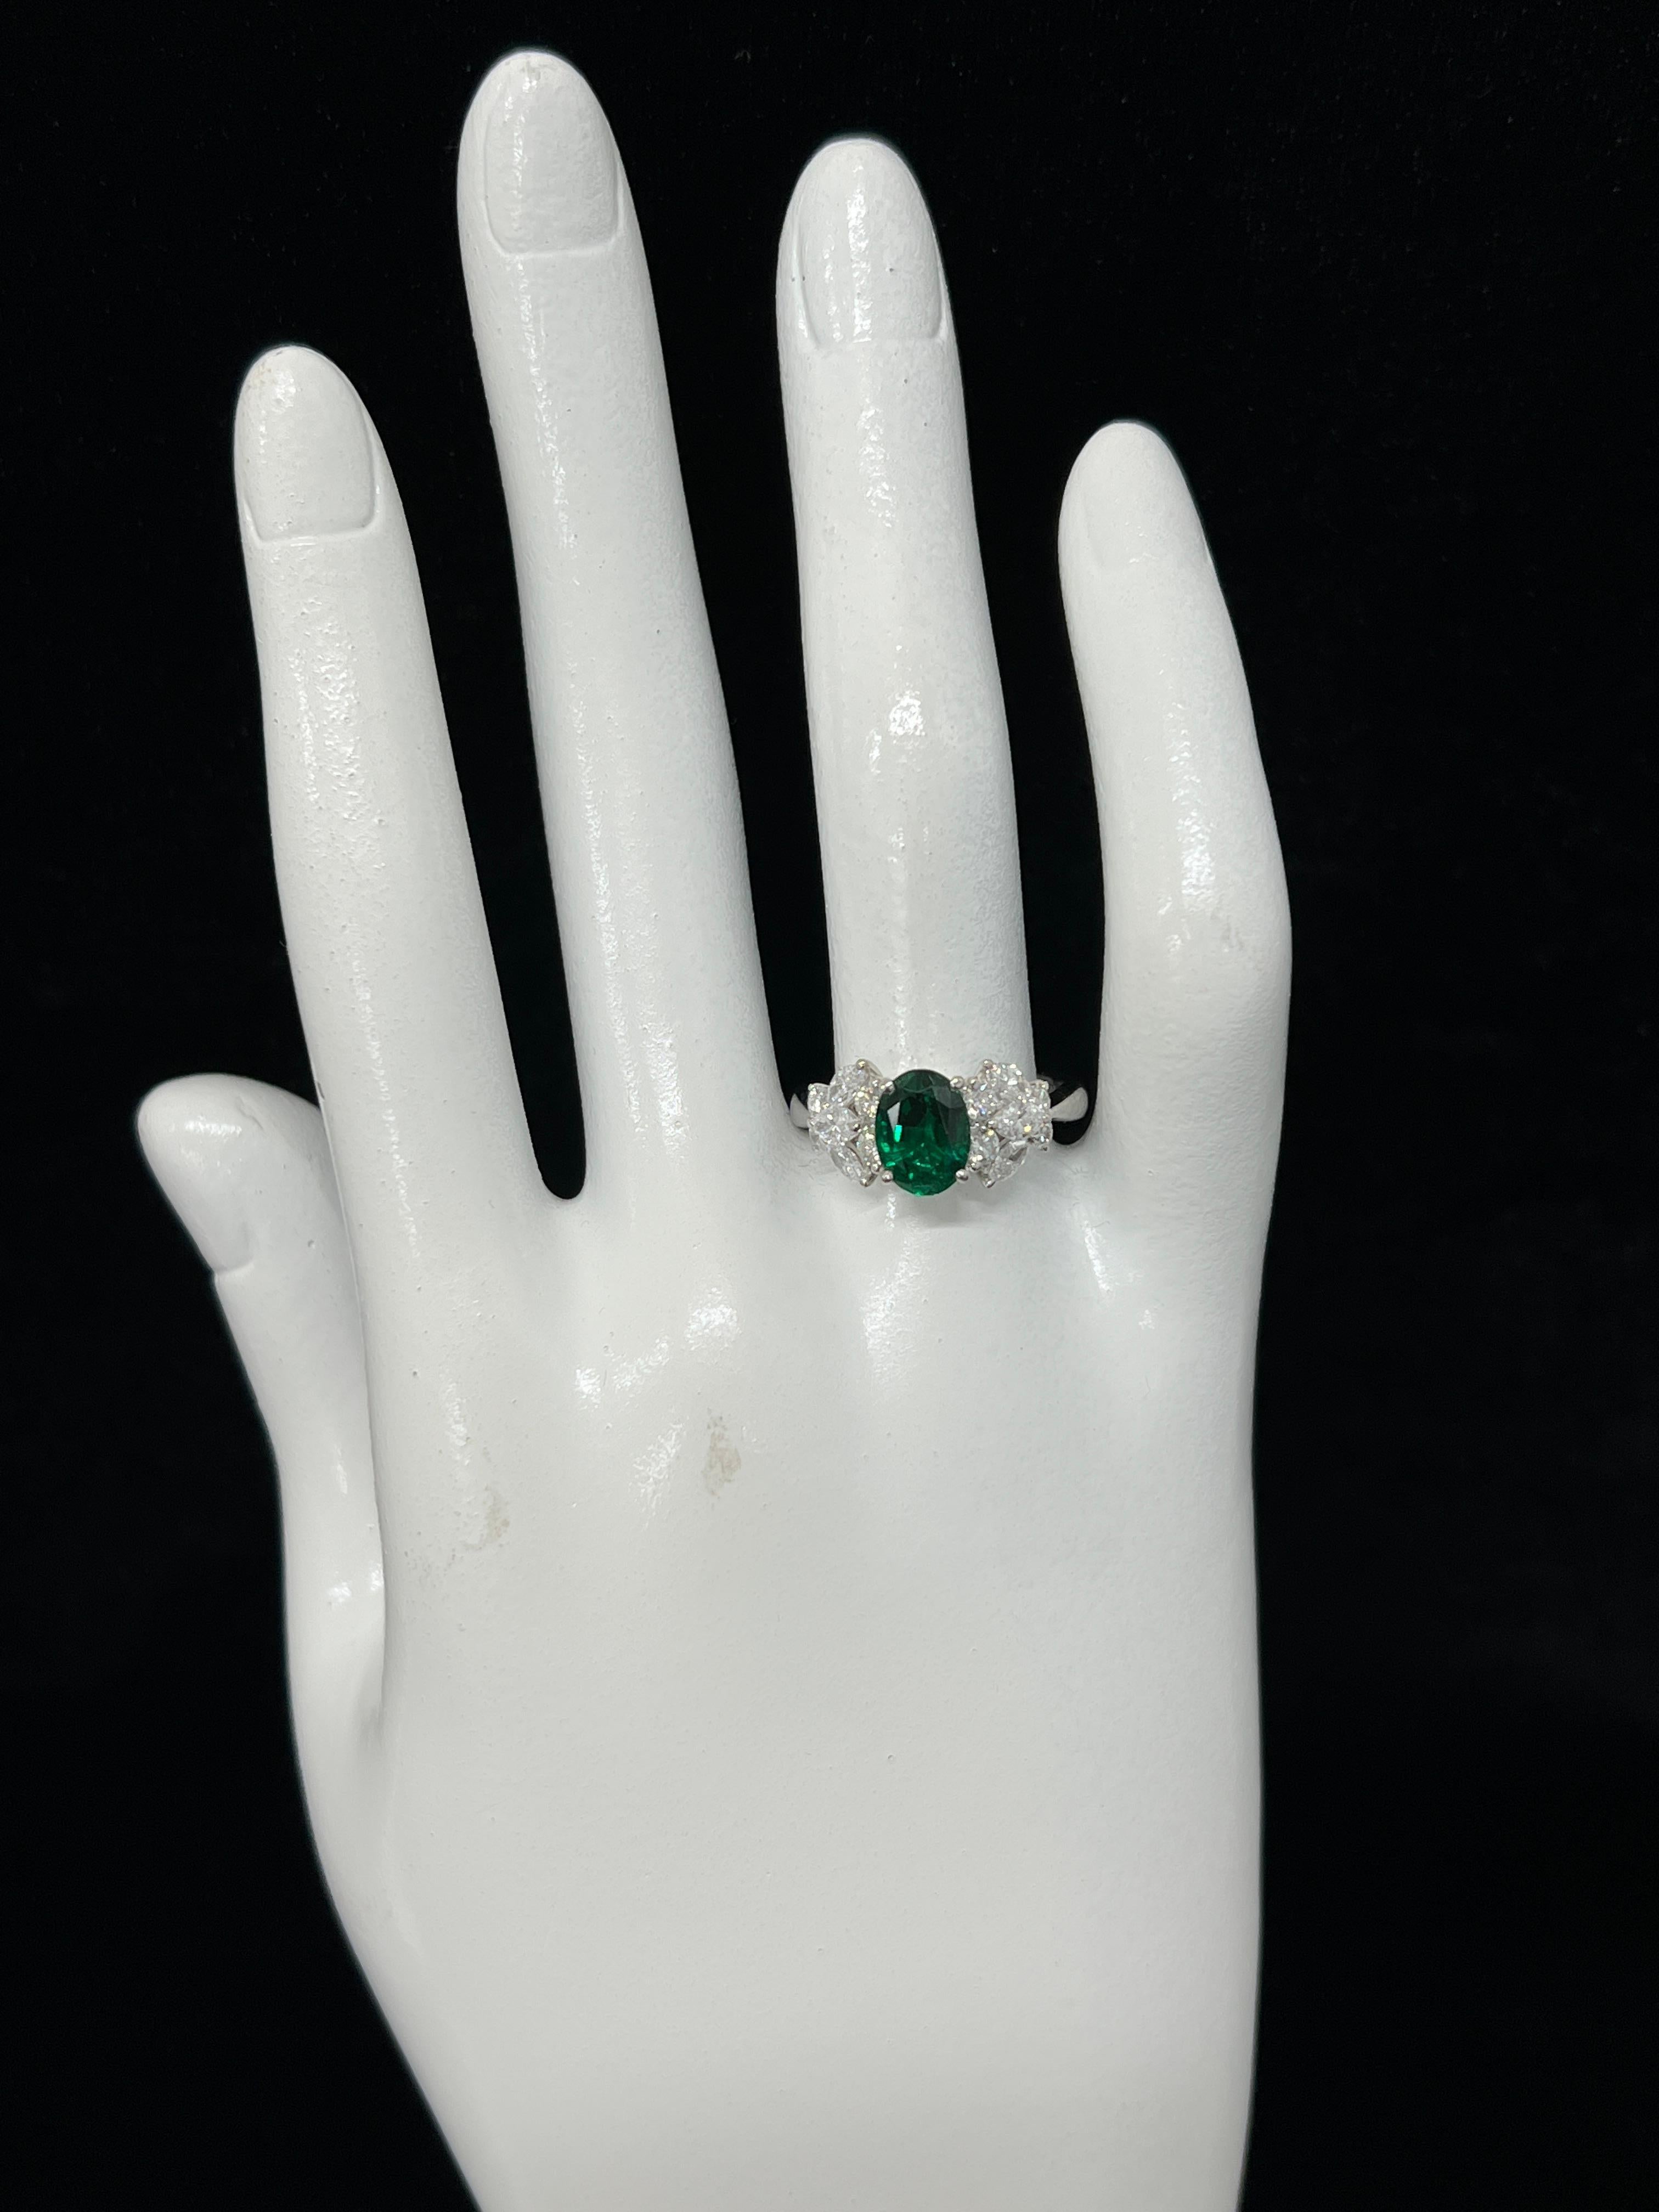 1.28 Carat Natural Vivid Green Emerald and Diamond Ring Made in Platinum For Sale 1